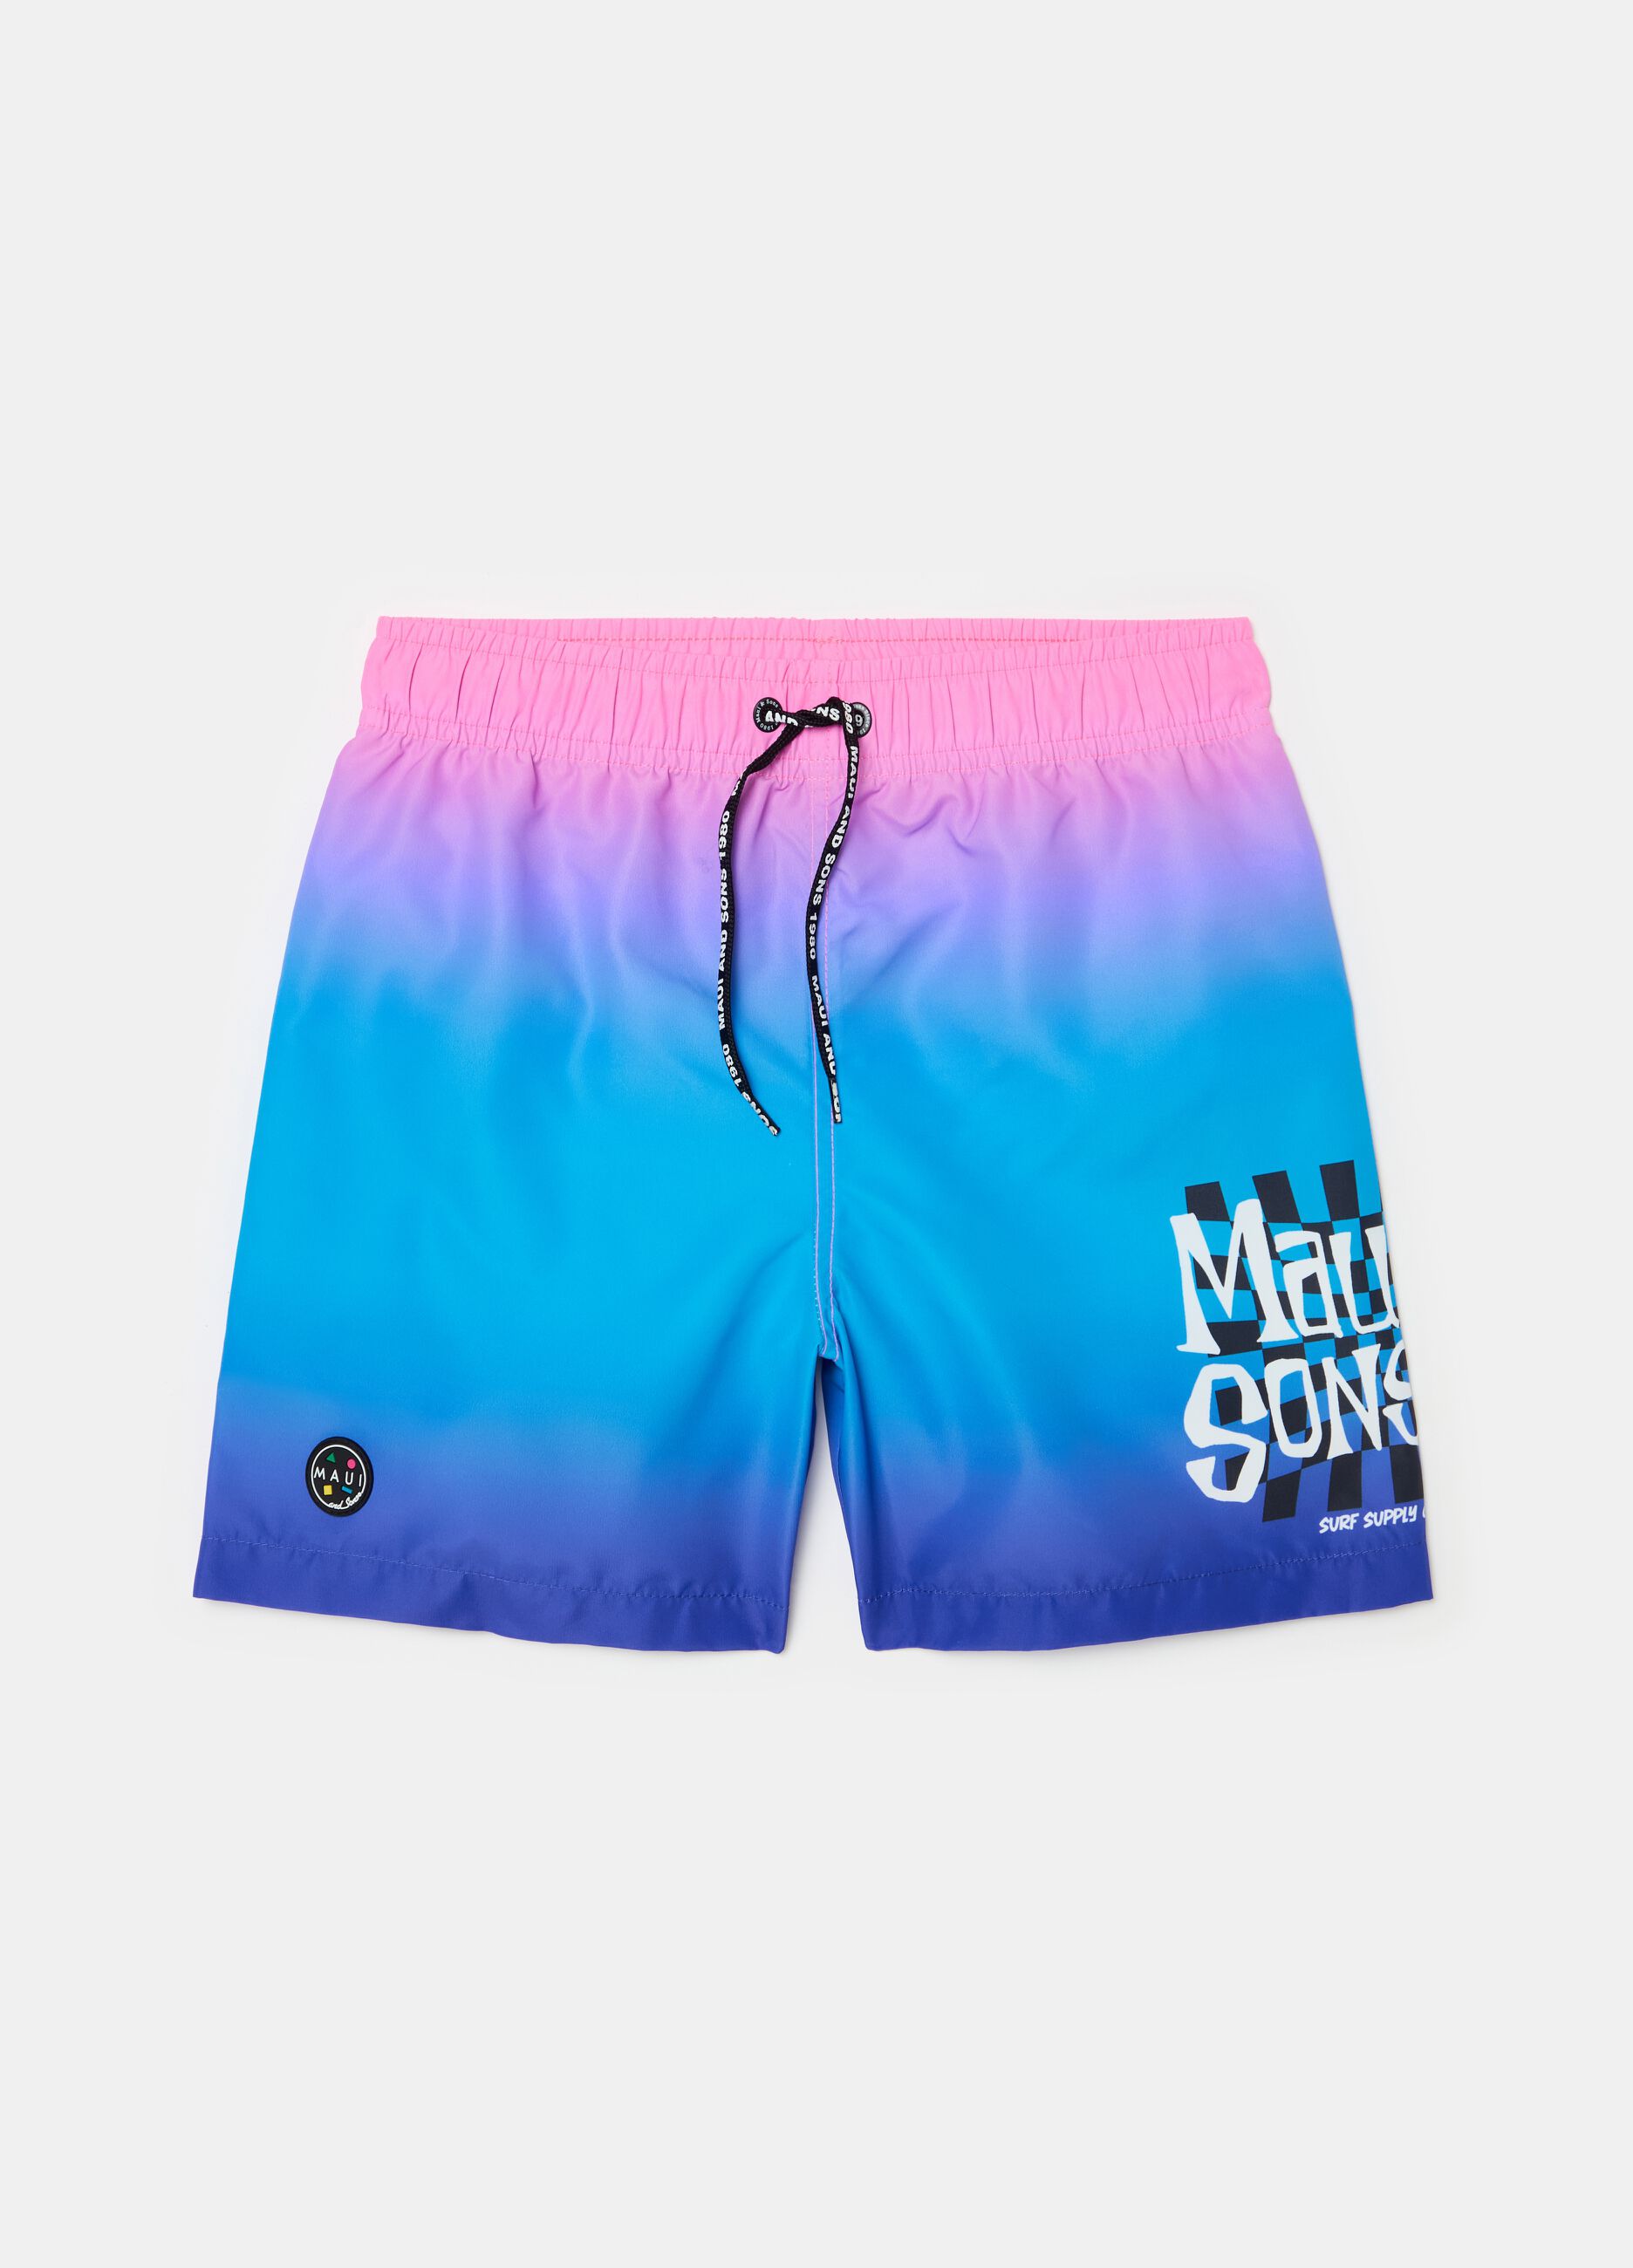 Degradé swimming trunks with surf print